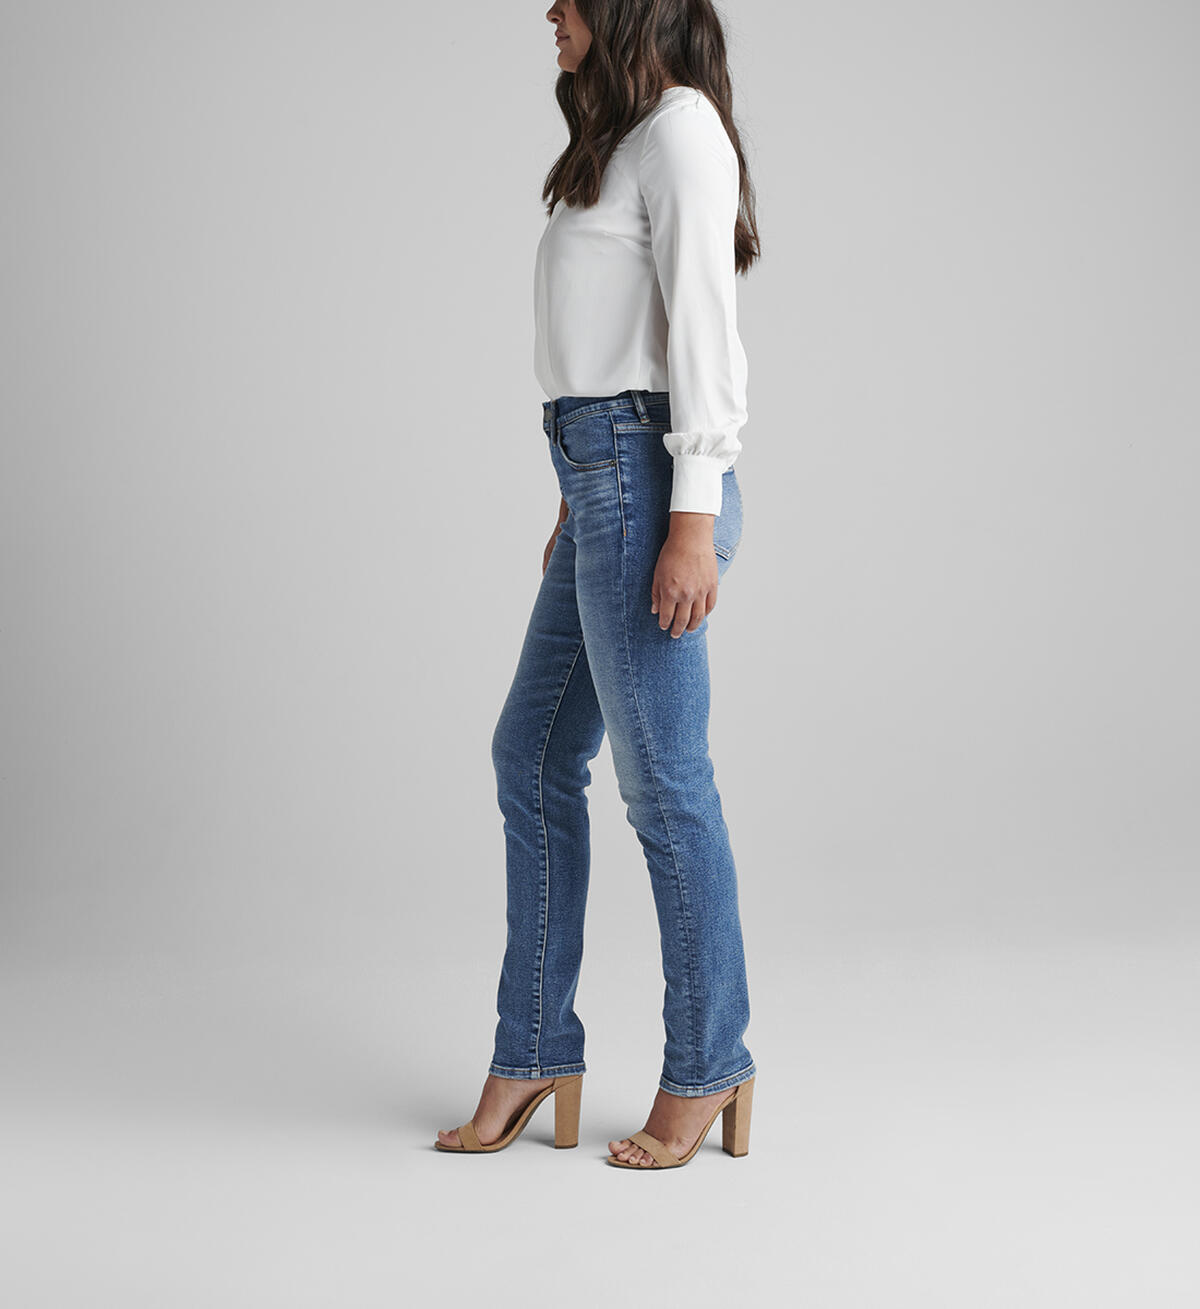 Valentina High Rise Straight Leg Pull-On Jeans Petite, , hi-res image number 2